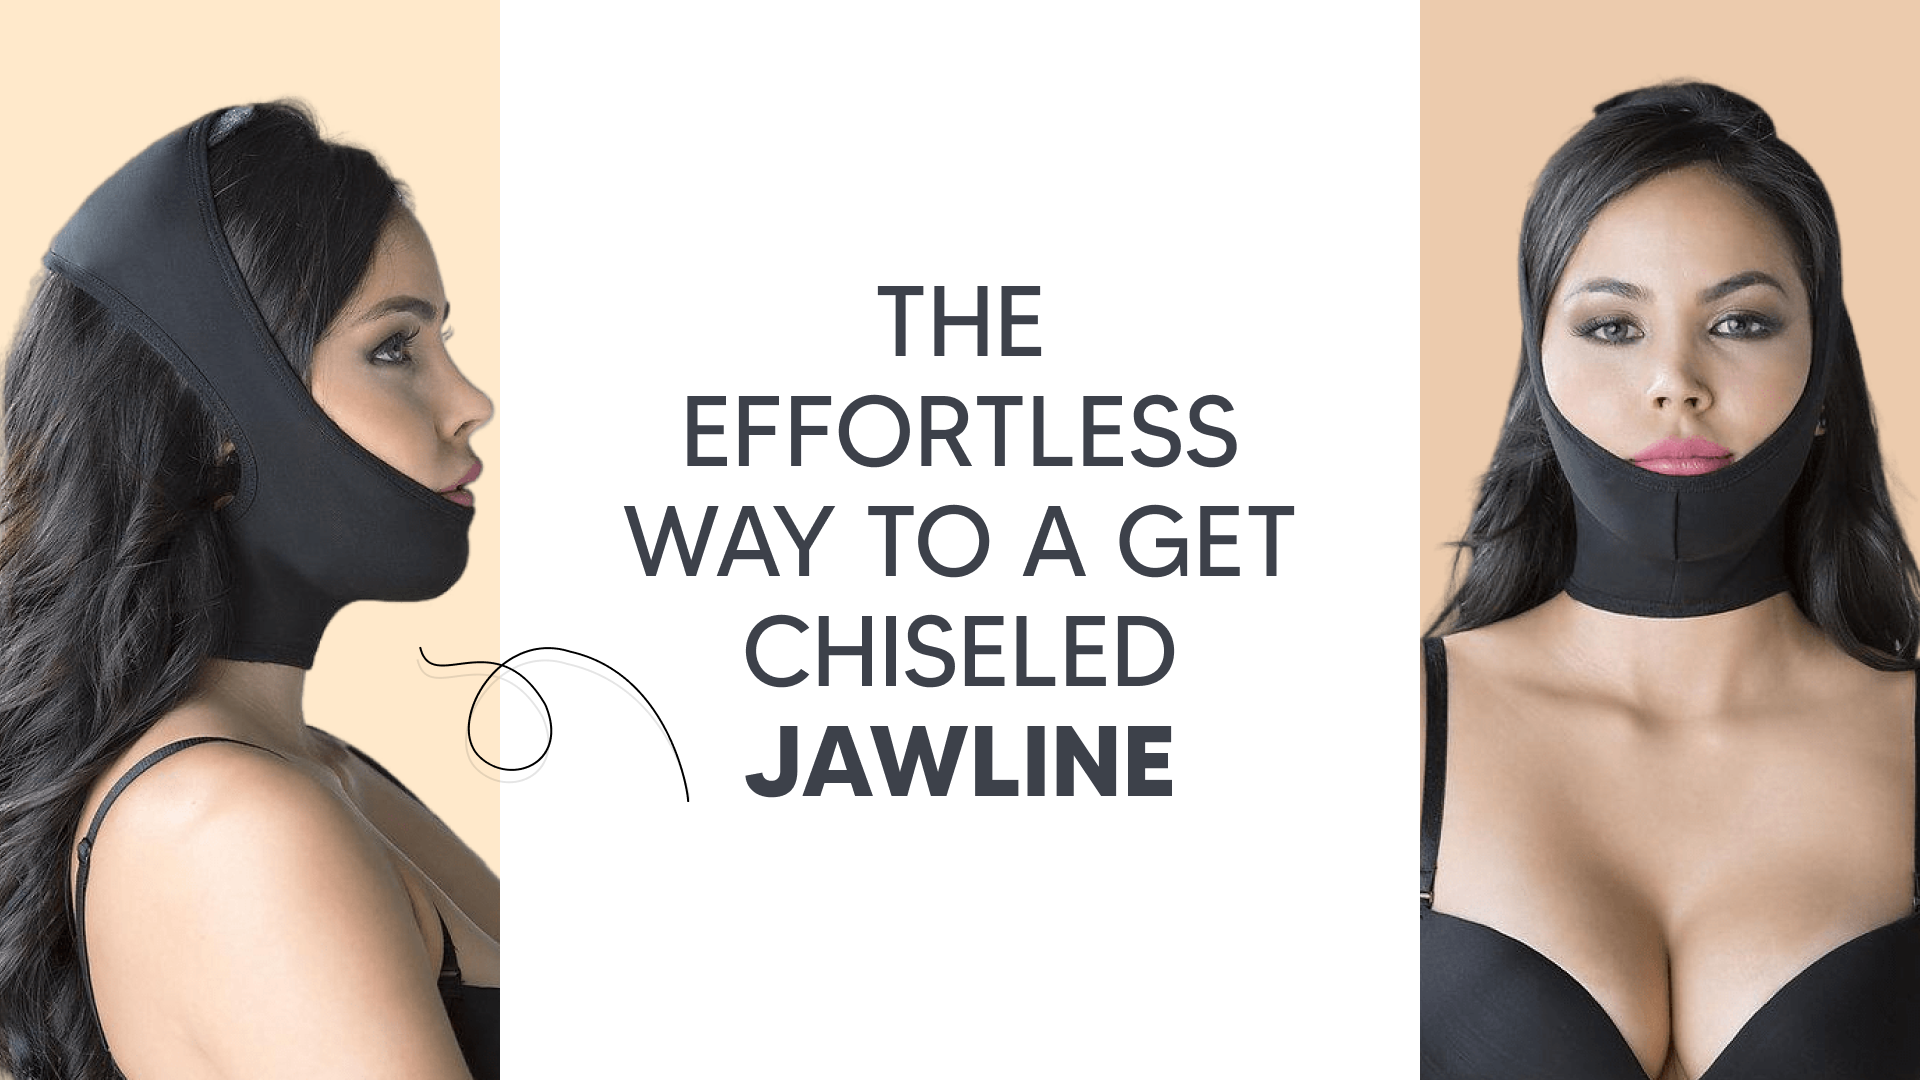 The Effortless Way to a get Chiseled Jawline